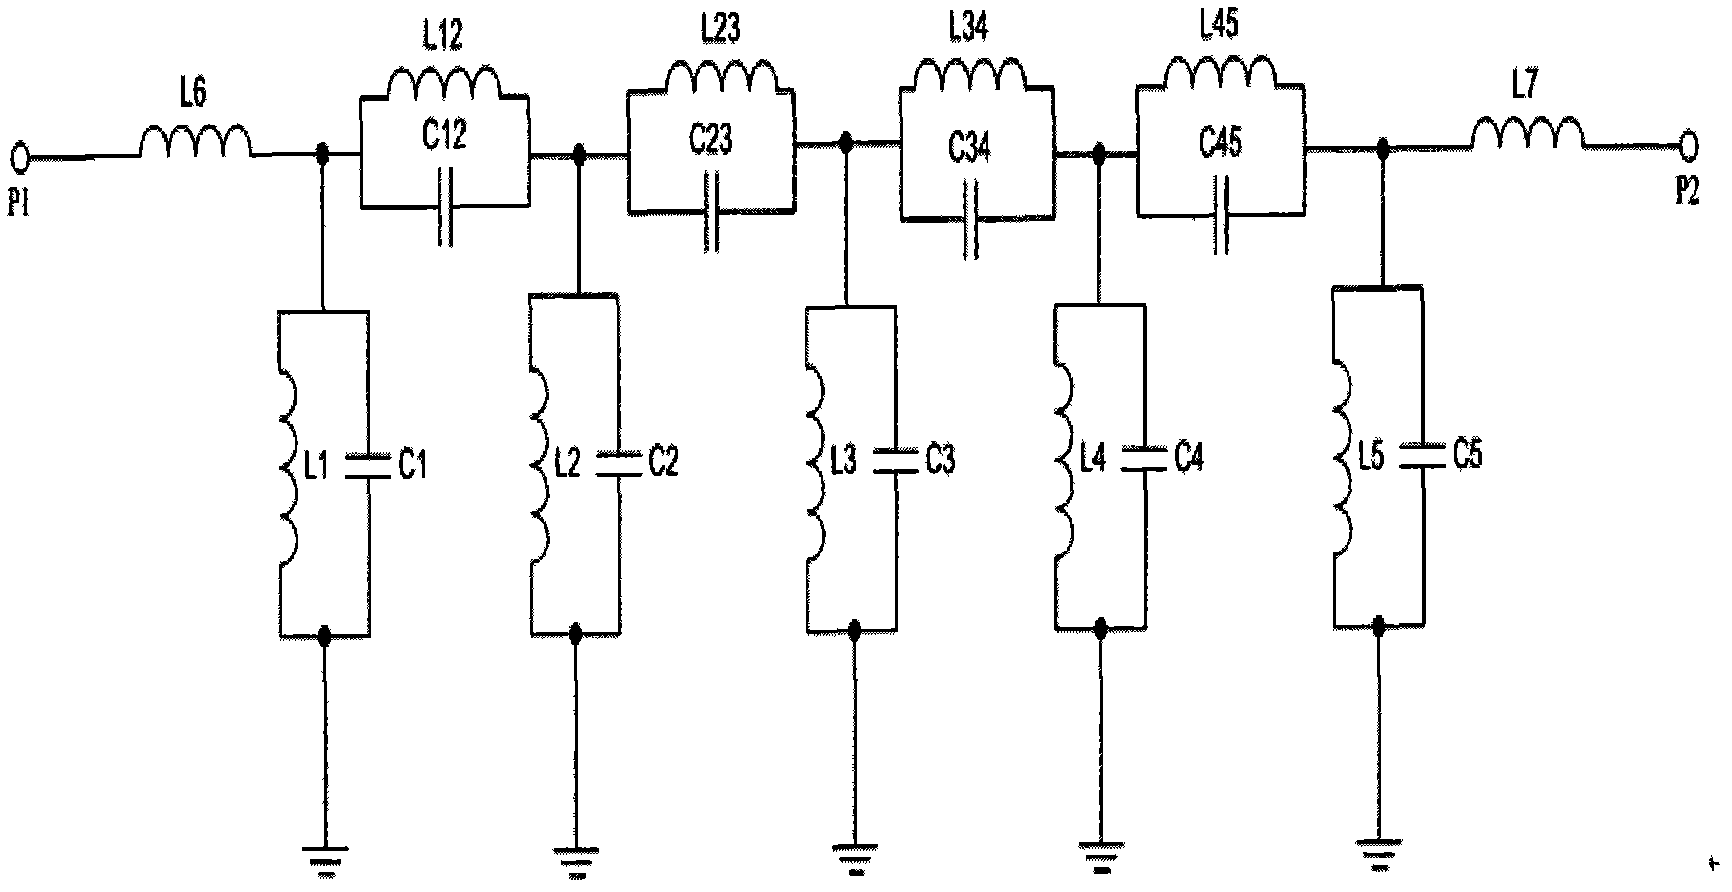 C-band low-loss and high-inhibition micro band-pass filter